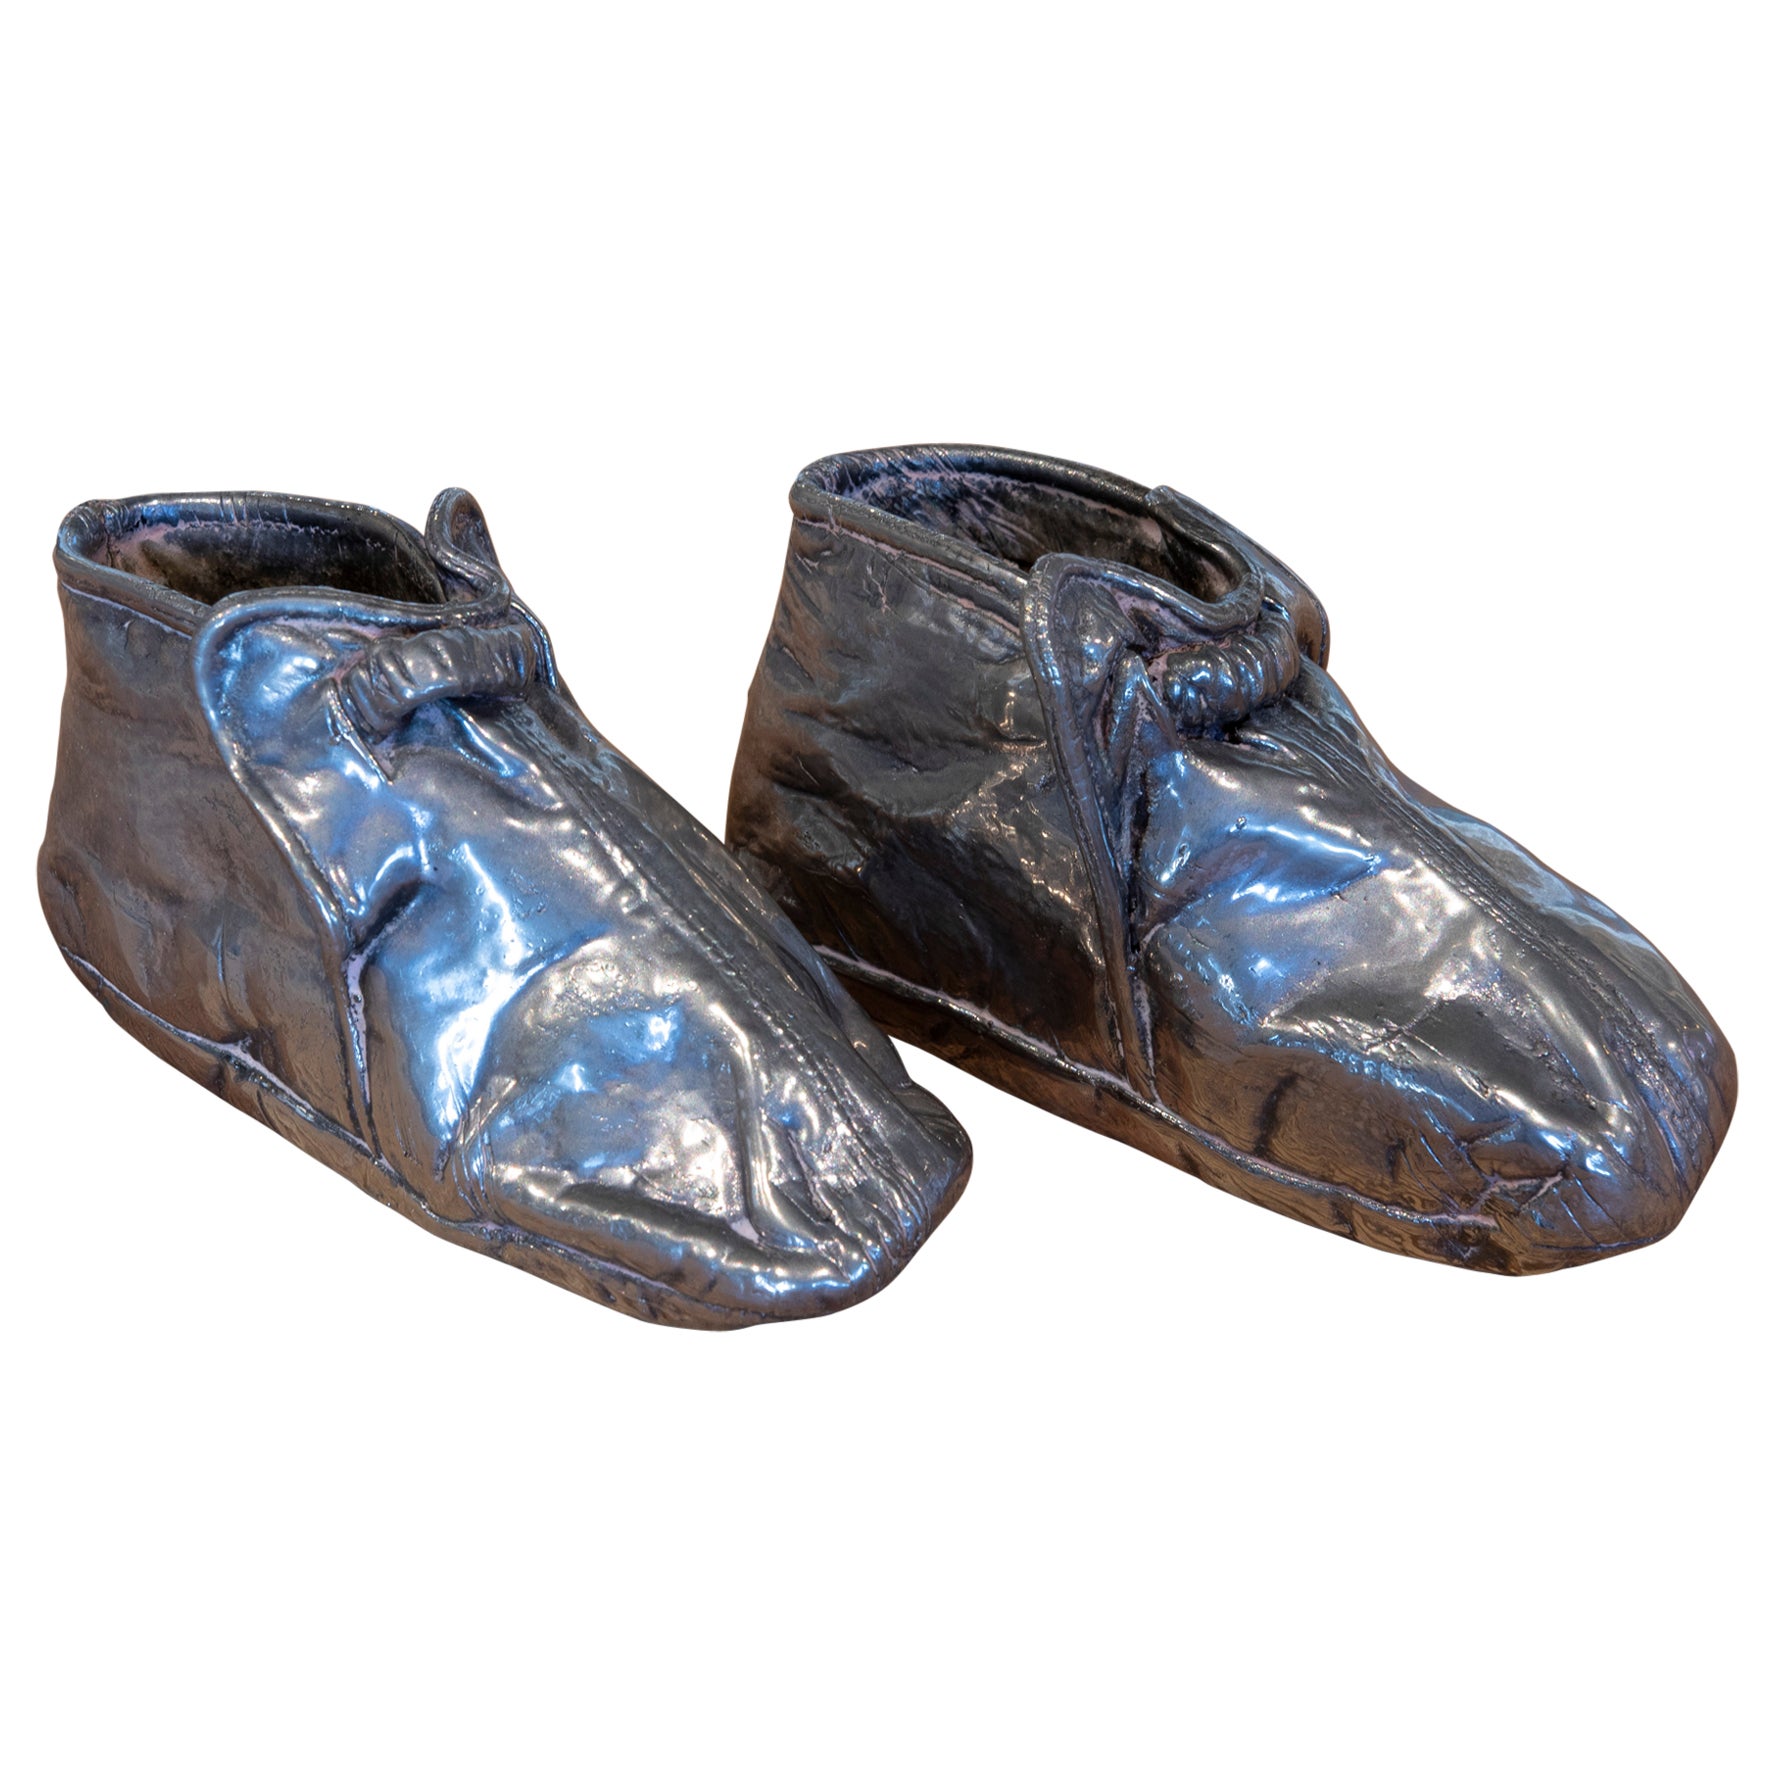 1970s English Pair of Silver Plated Metal Shoes